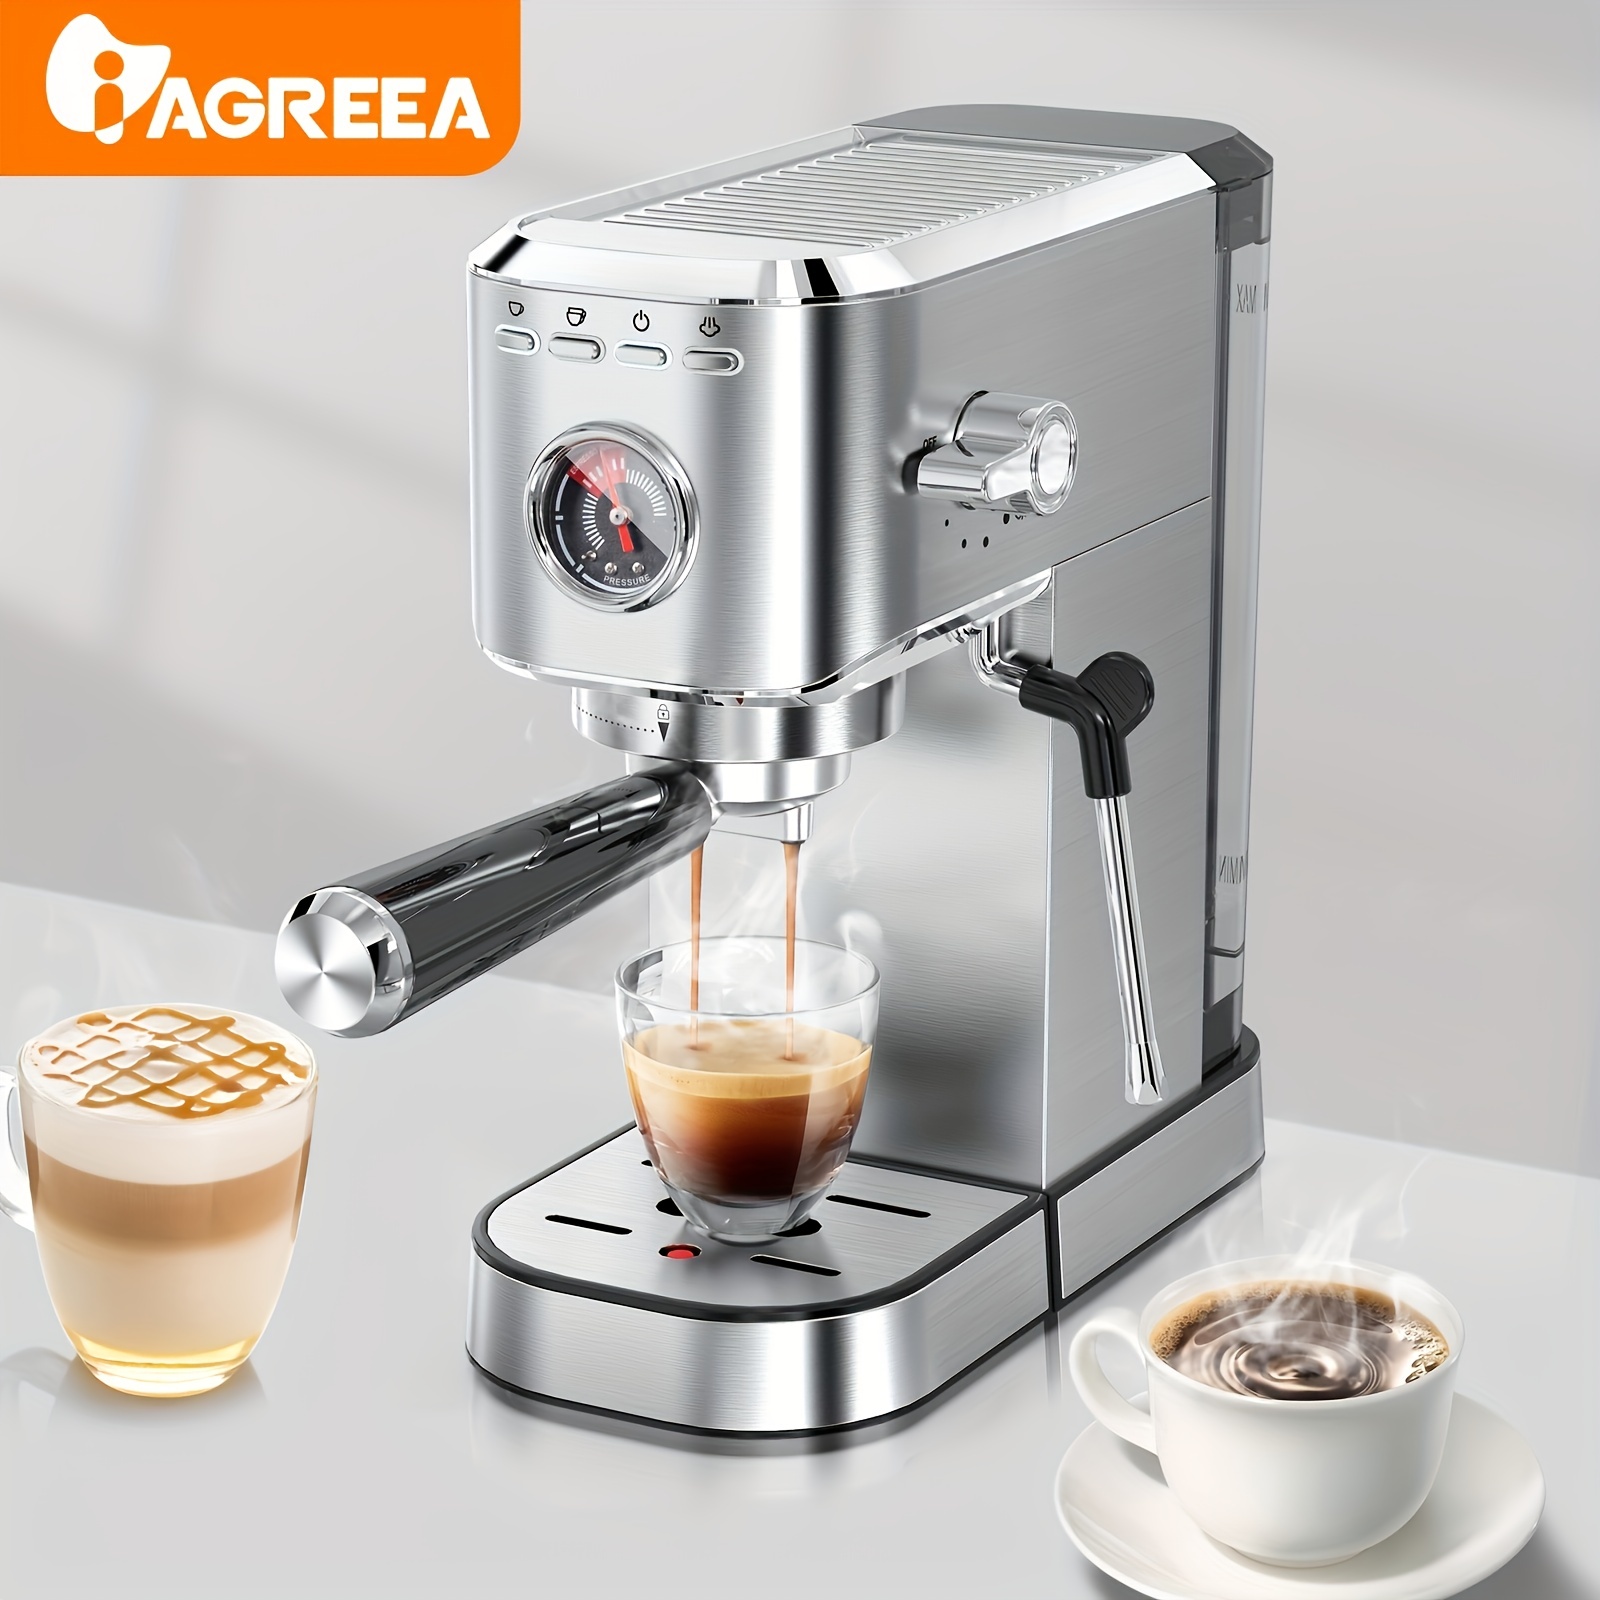 Cafelffe Espresso Machine 15 Bar Expresso Coffee Machine With Milk Frother  Wand For Cappuccino&latte Coffee Maker Compact Design - Coffee Makers -  AliExpress